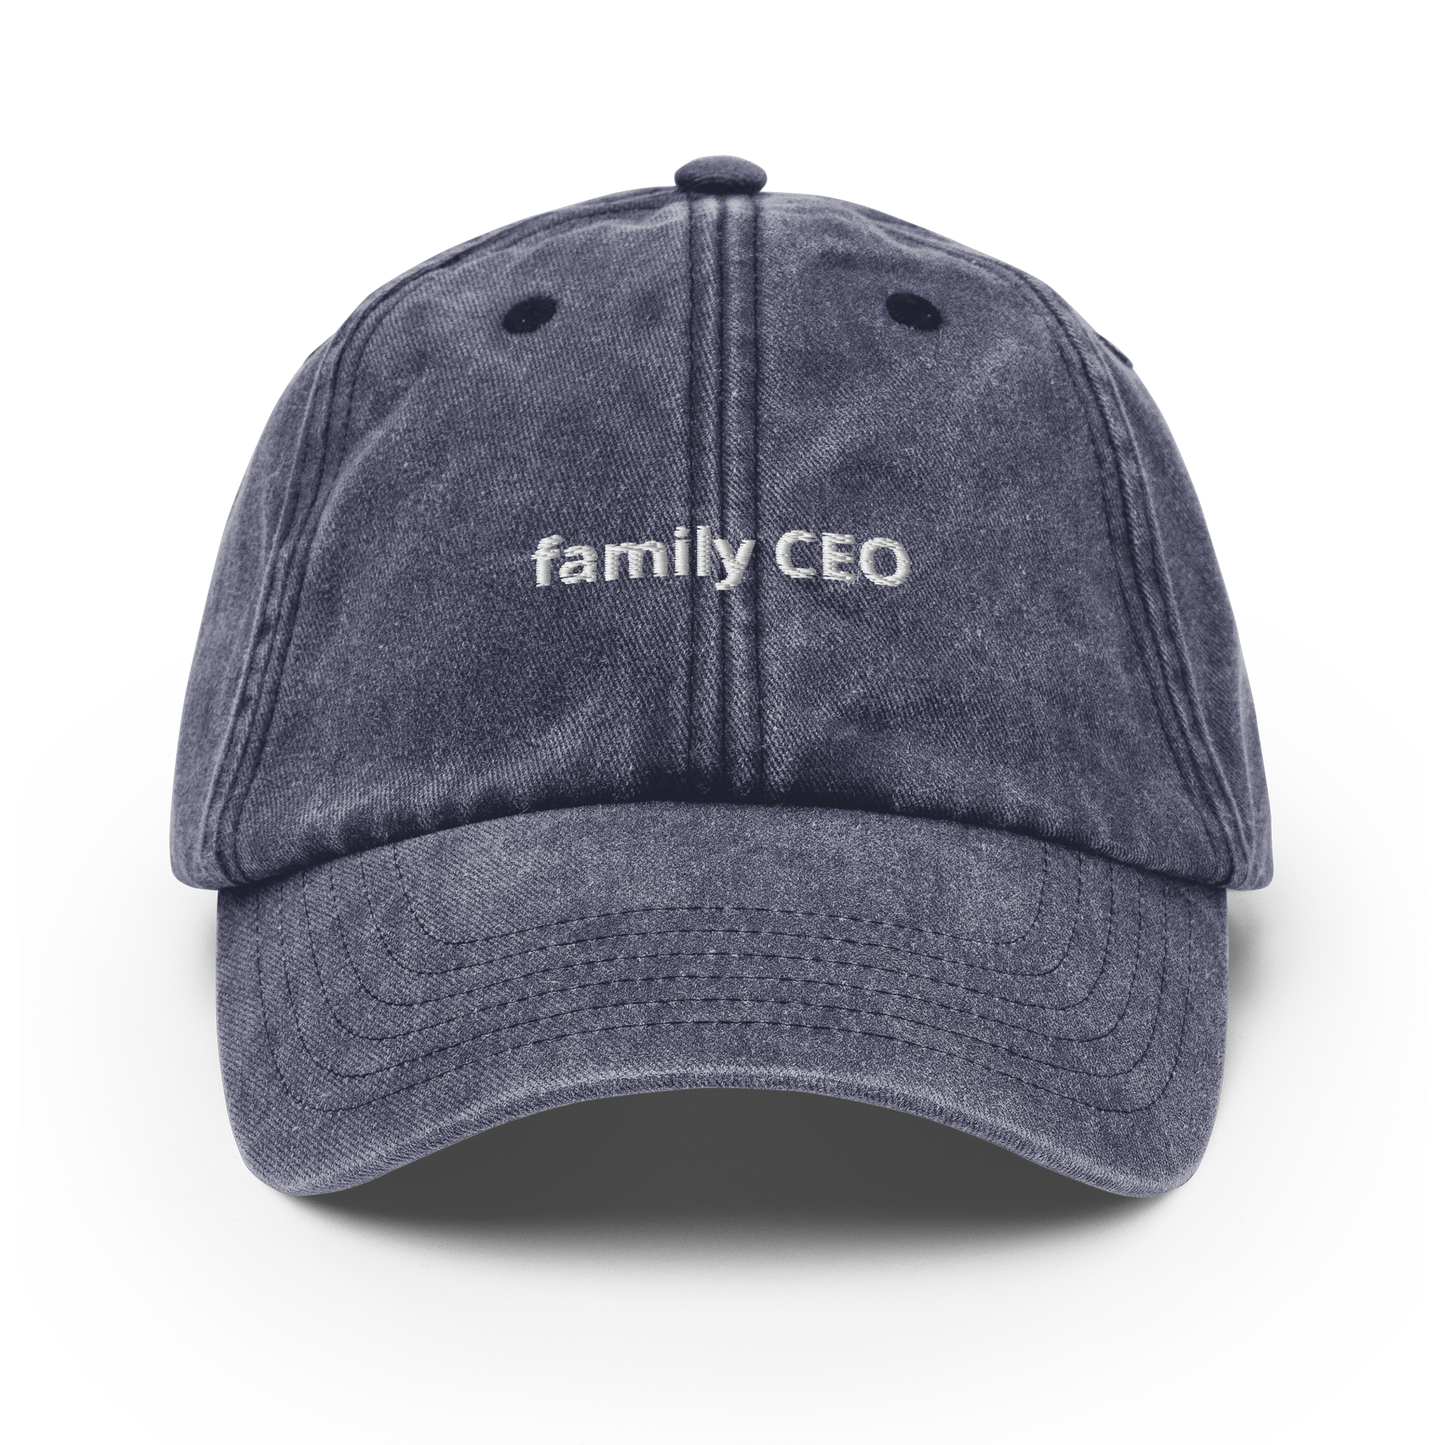 Family CEO - Vintage Hat